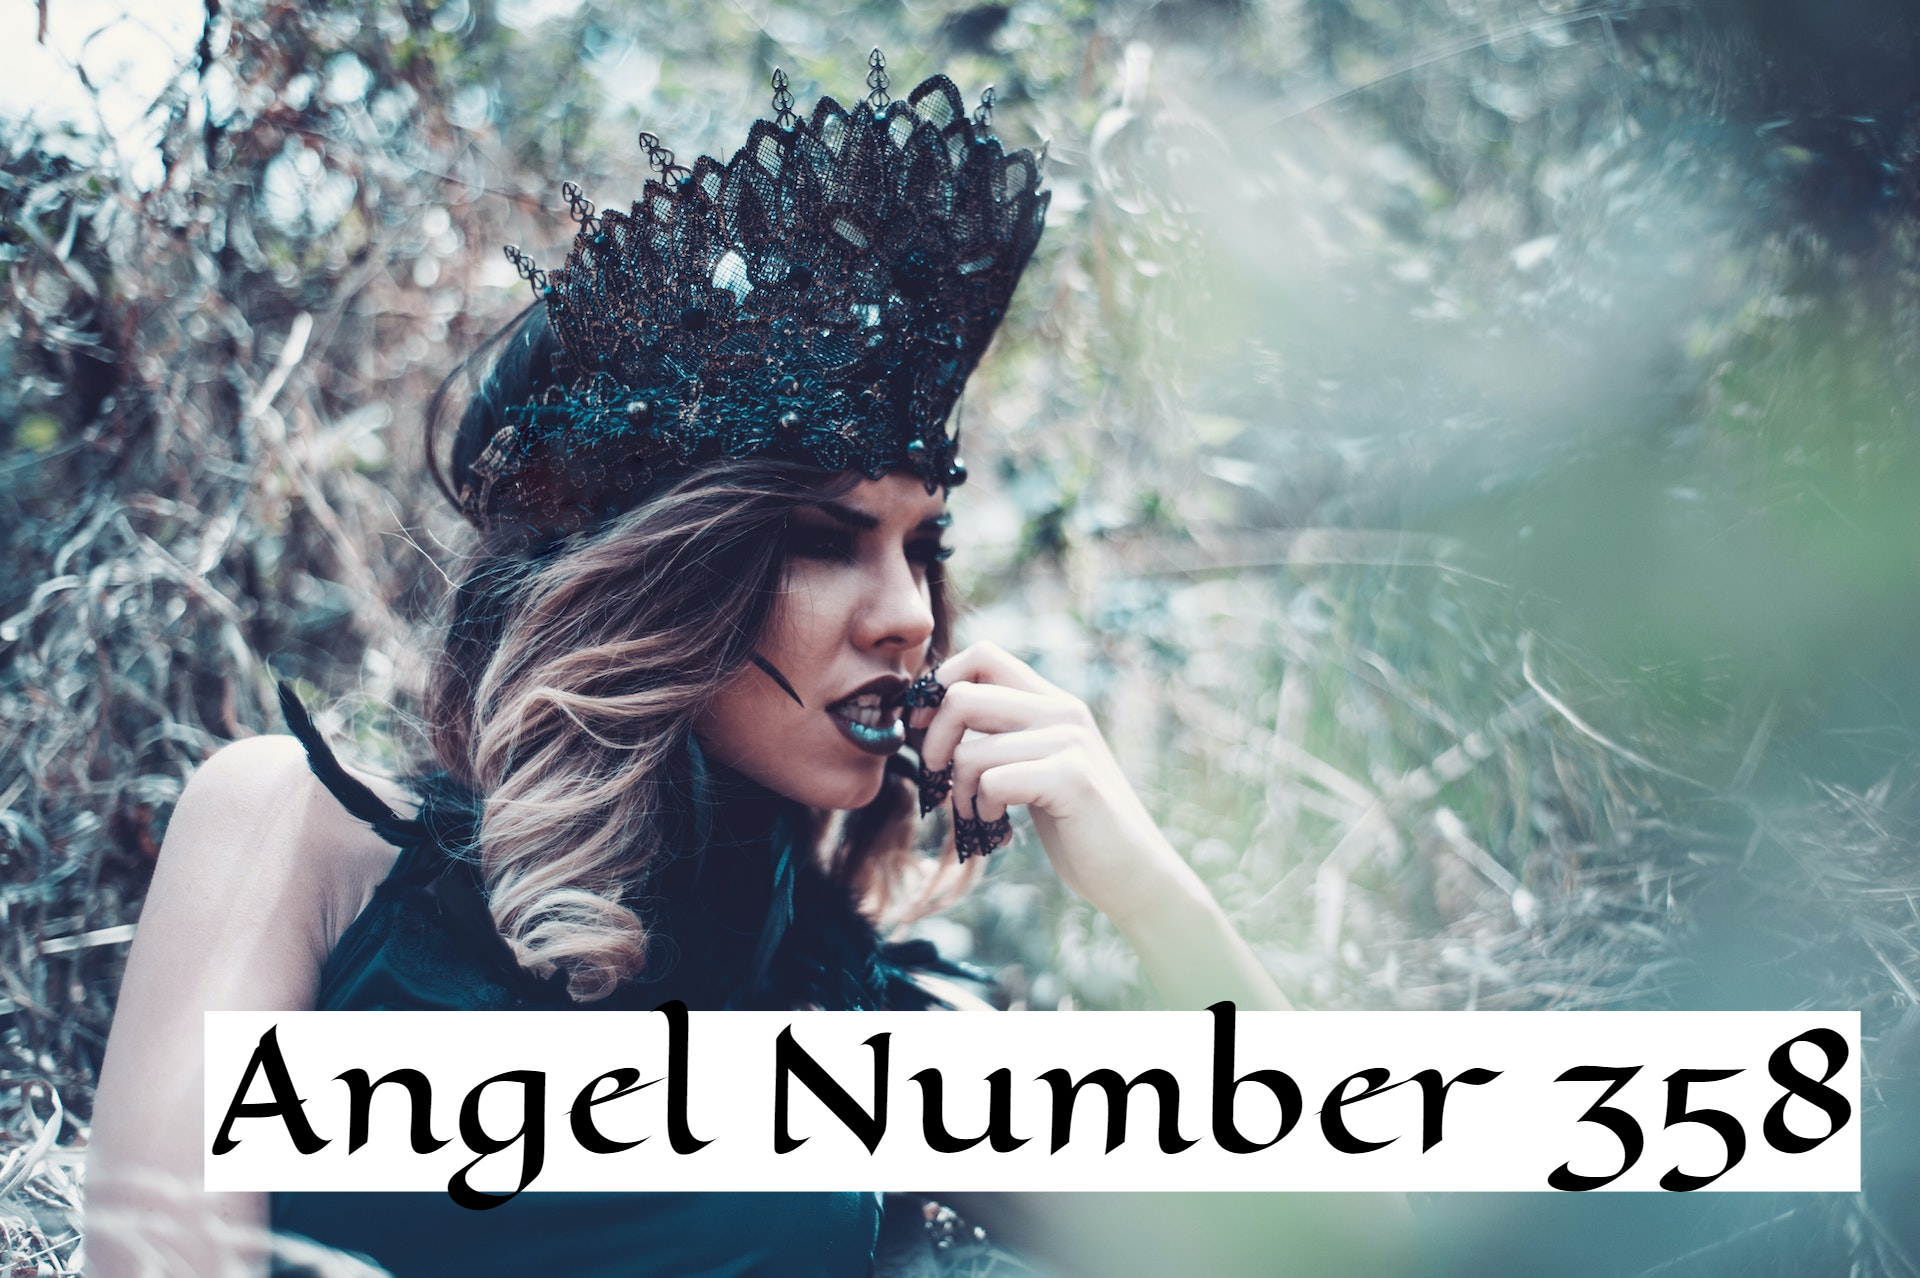 Angel Number 358 - Brings Success, Prosperity And Wealth